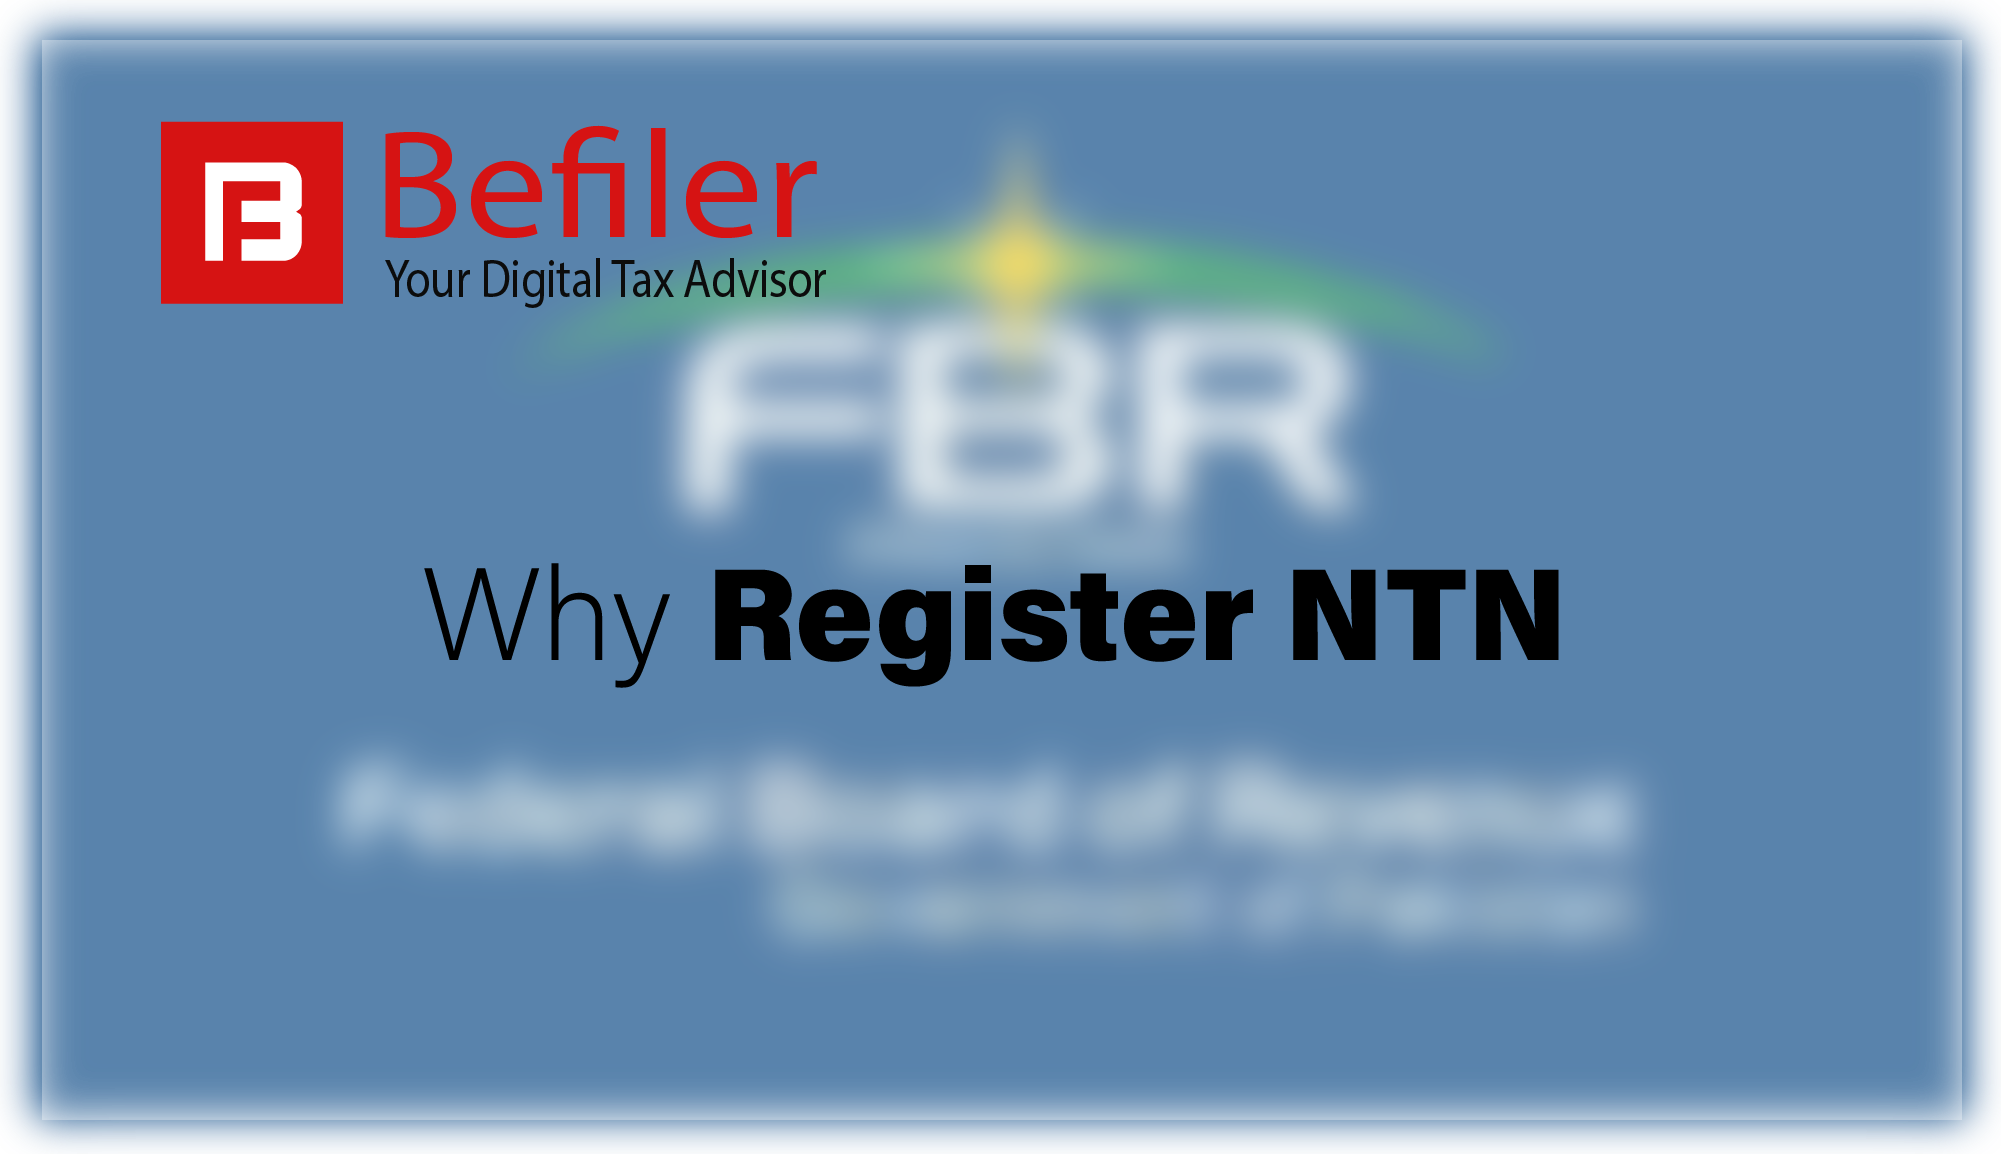 Important facts to know about NTN Registration